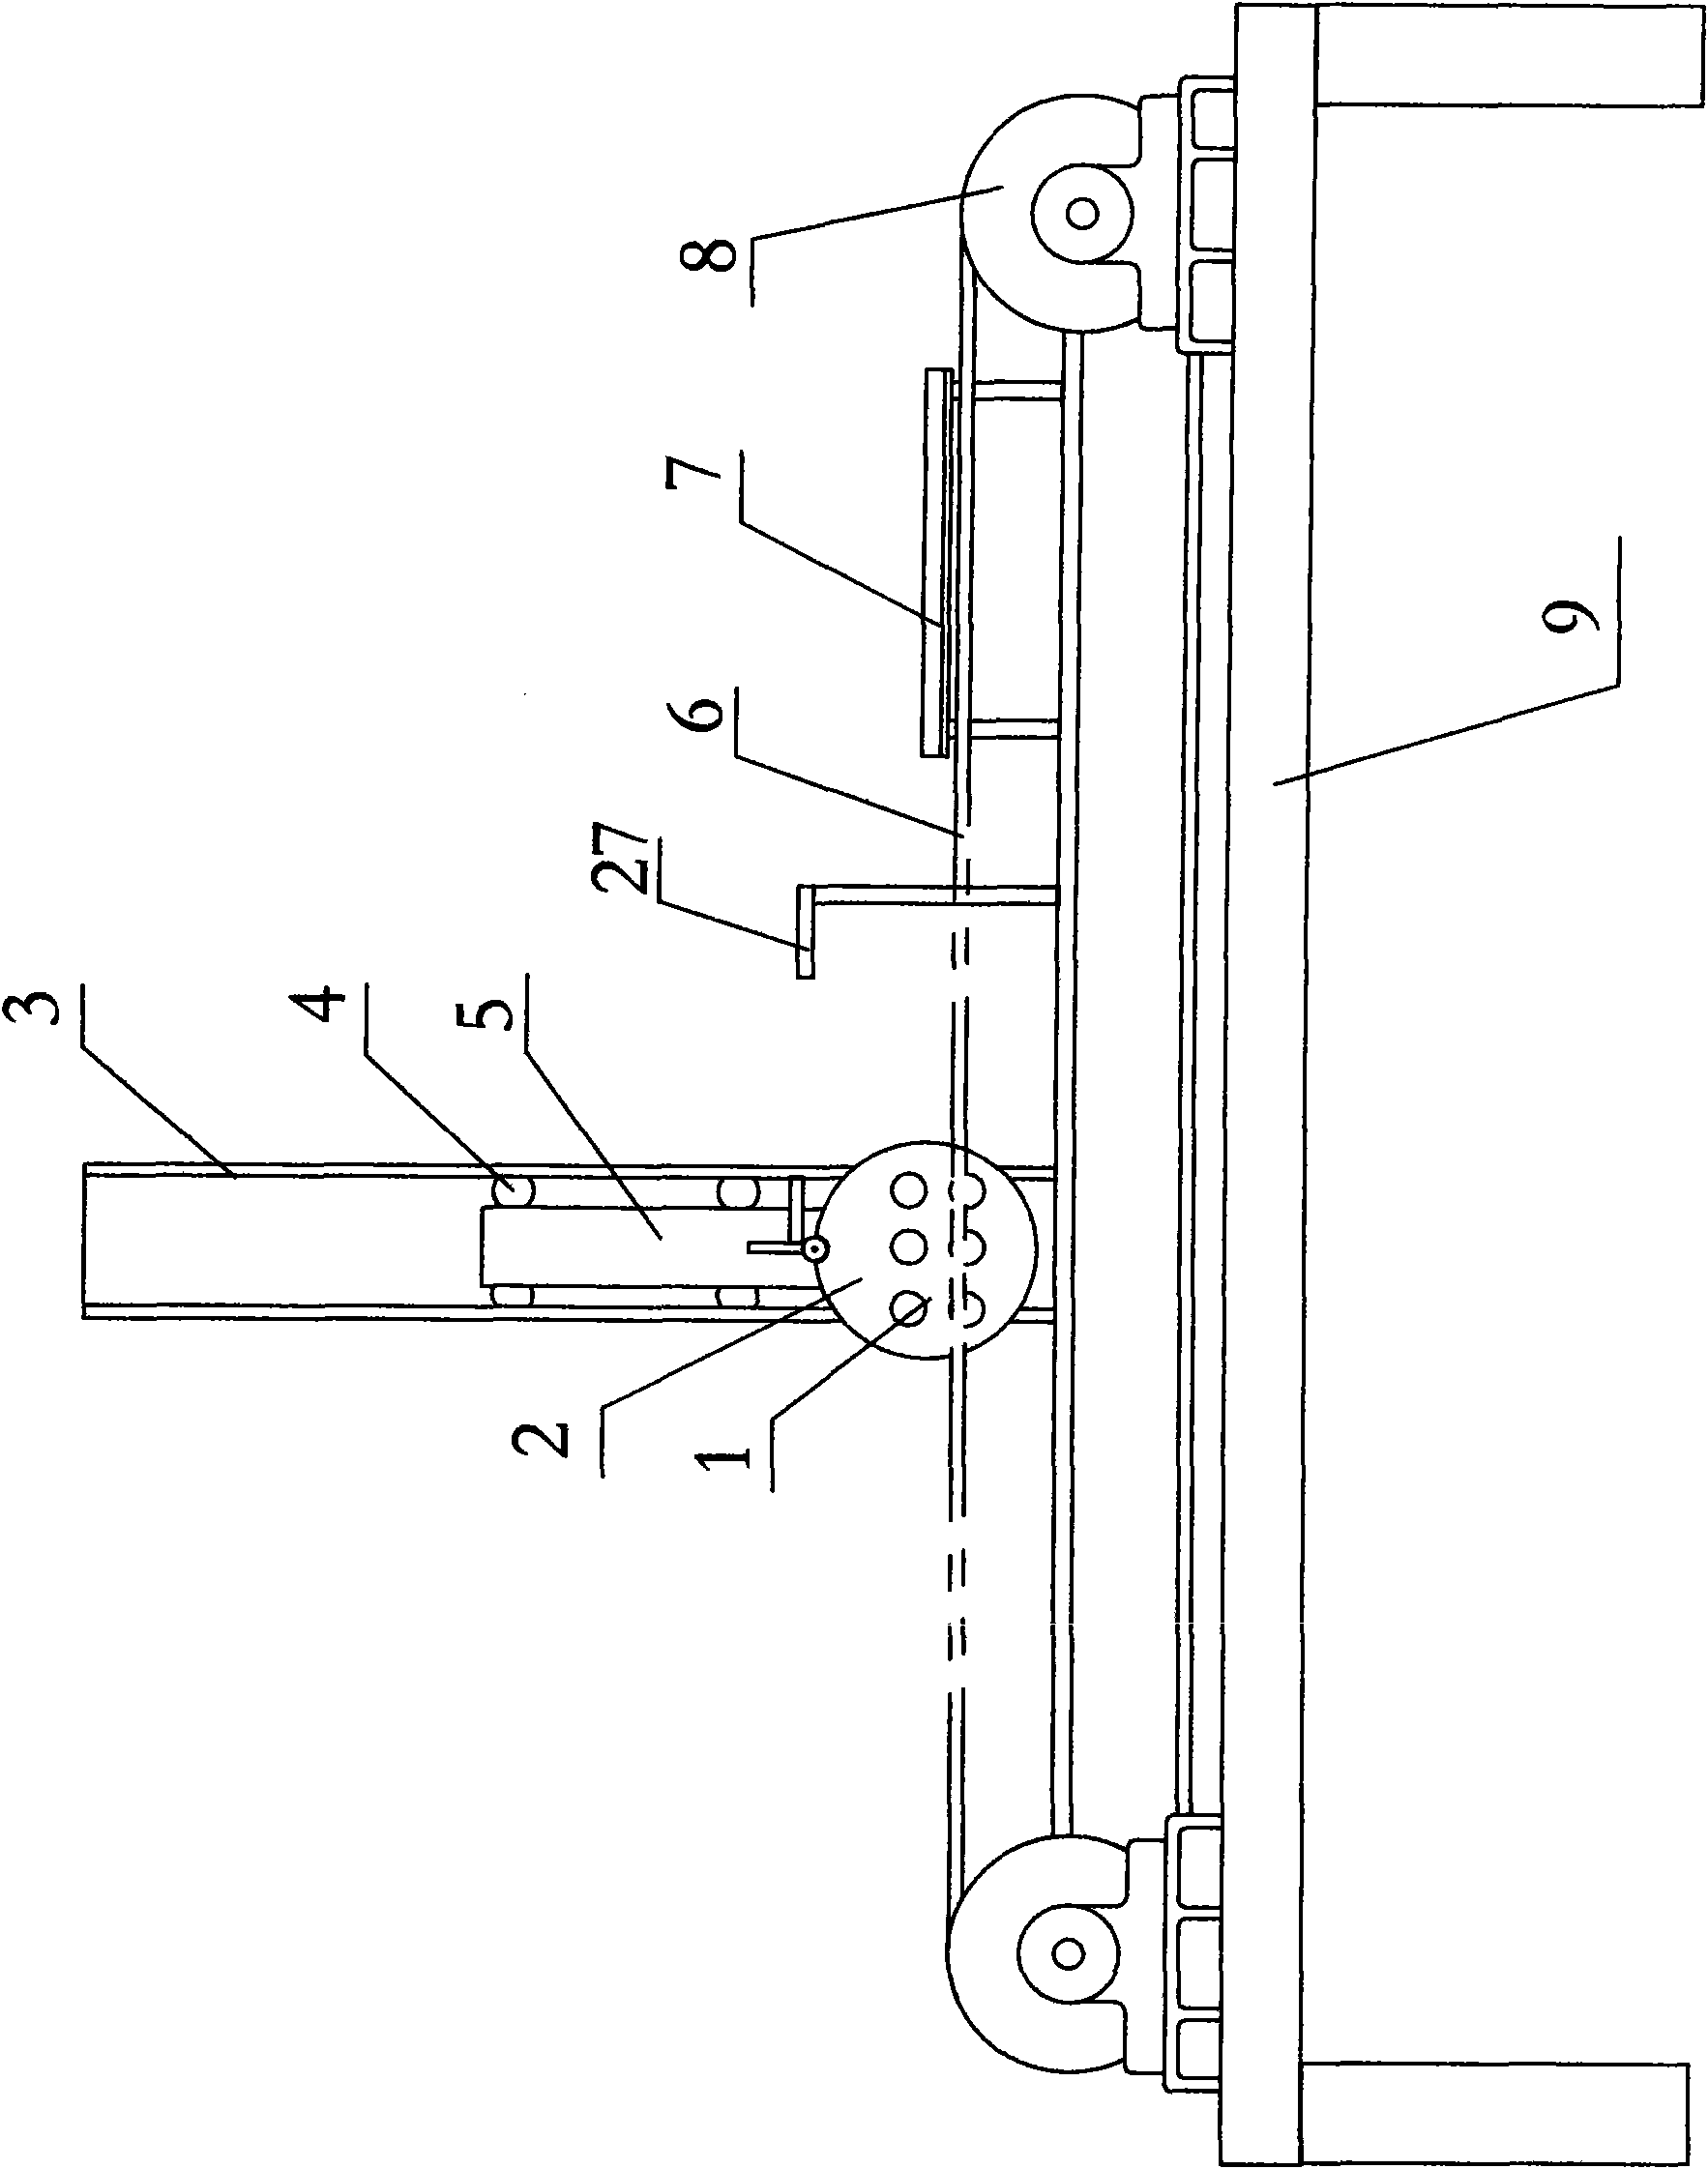 Method and device for turning tiles